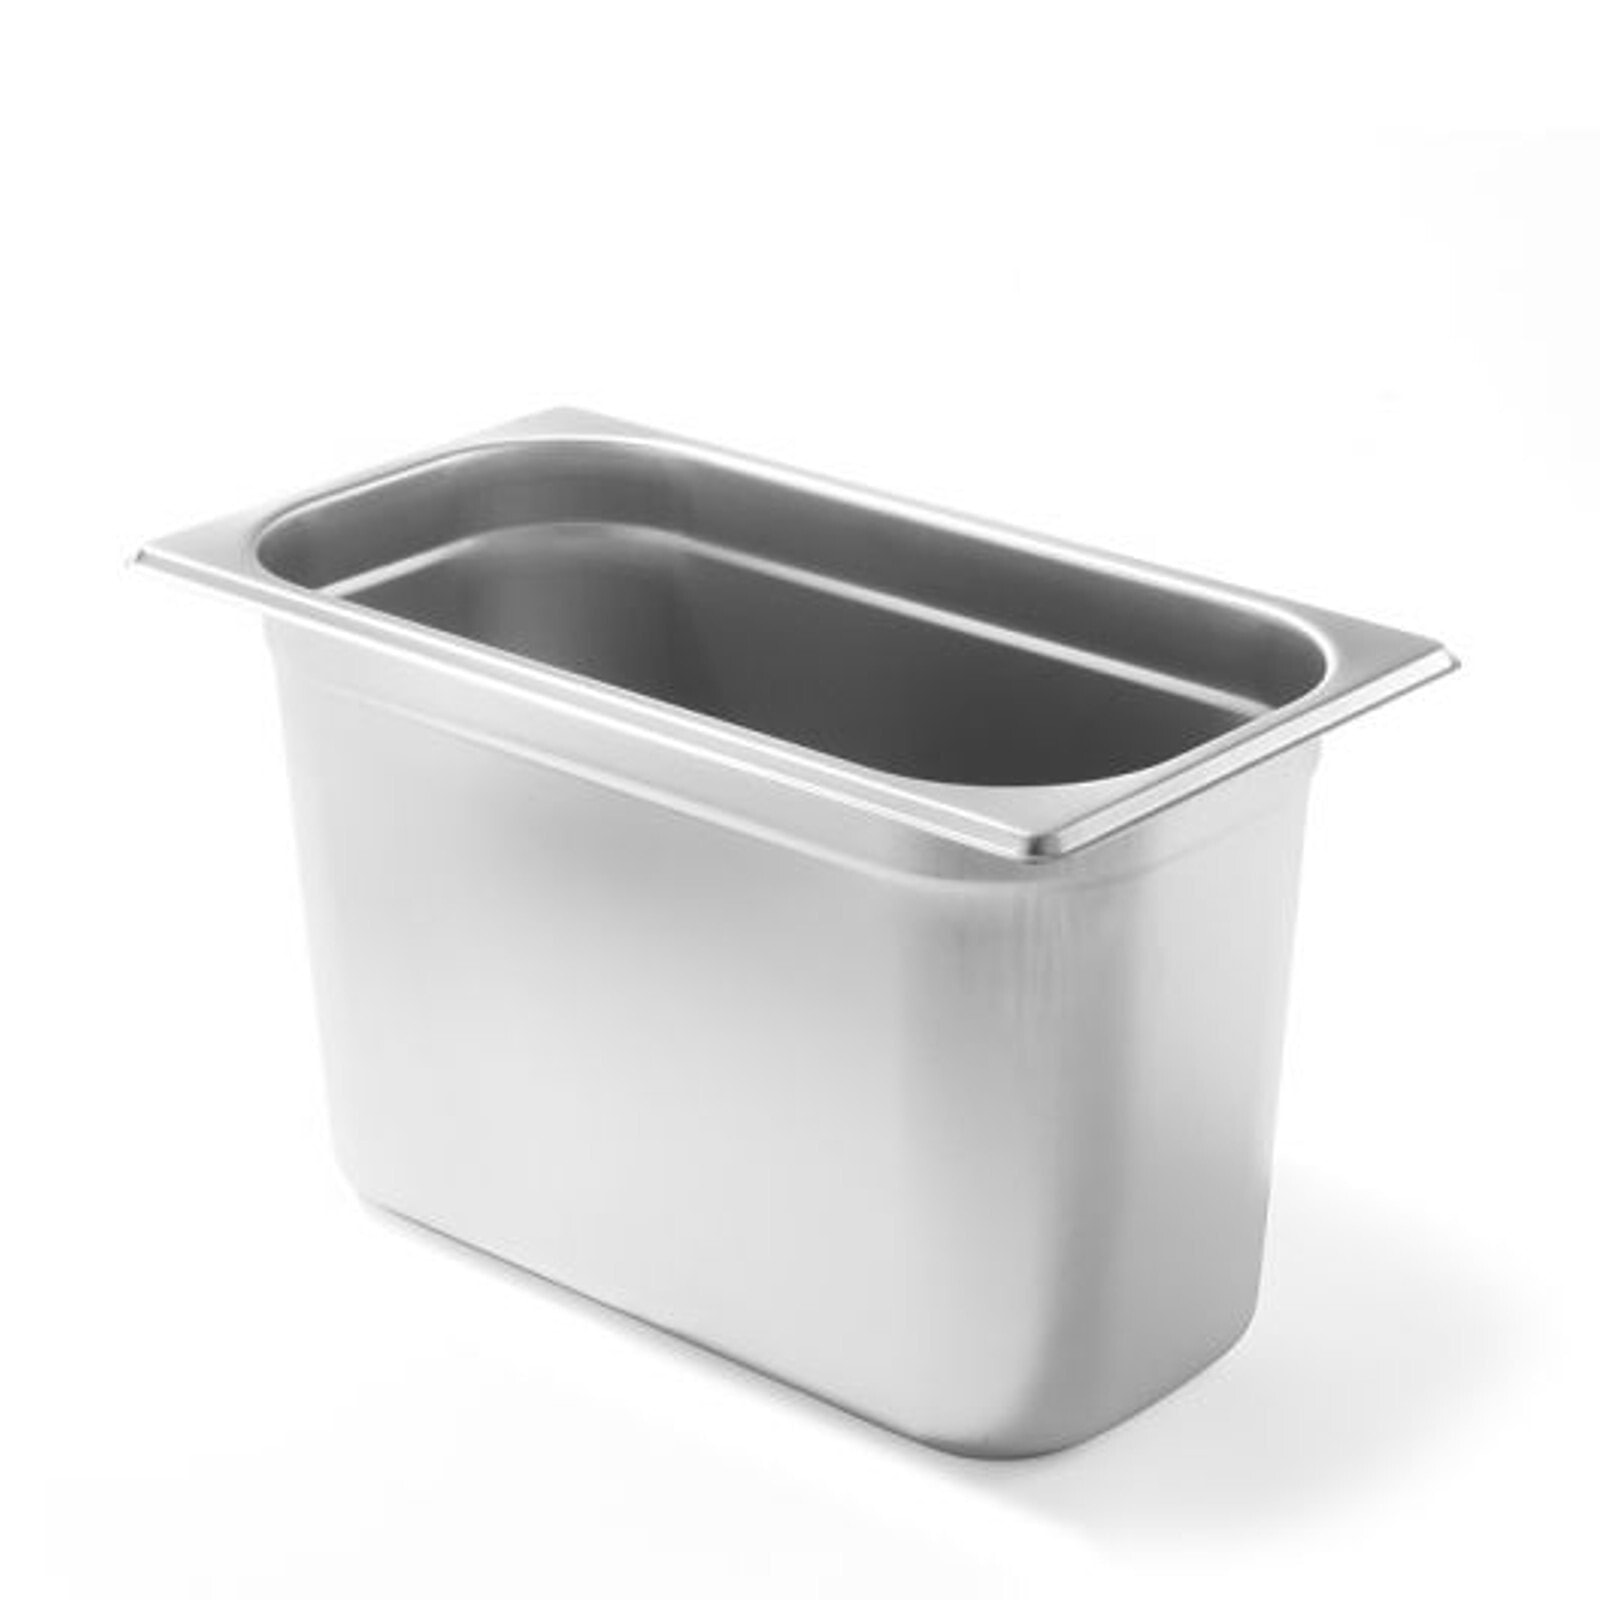 GN container 1/3 height 200 mm made of stainless steel - Hendi 800454